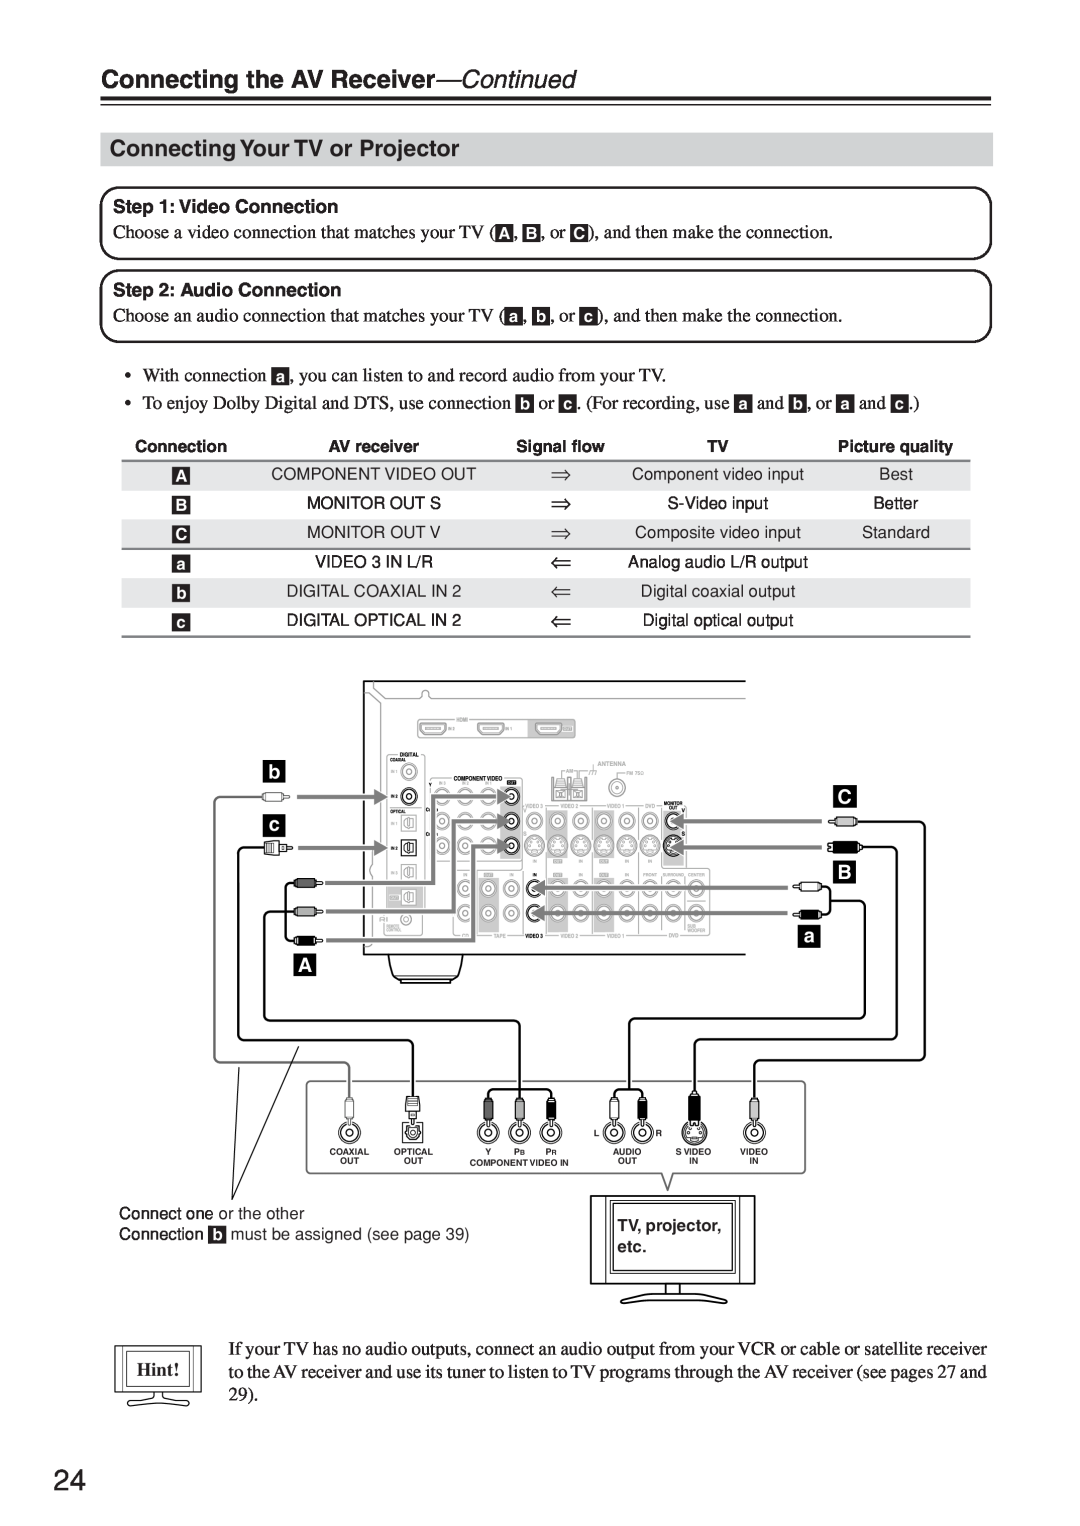 Onkyo HT-R640 instruction manual Connecting Your TV or Projector, b c A, Connecting the AV Receiver-Continued, Hint 